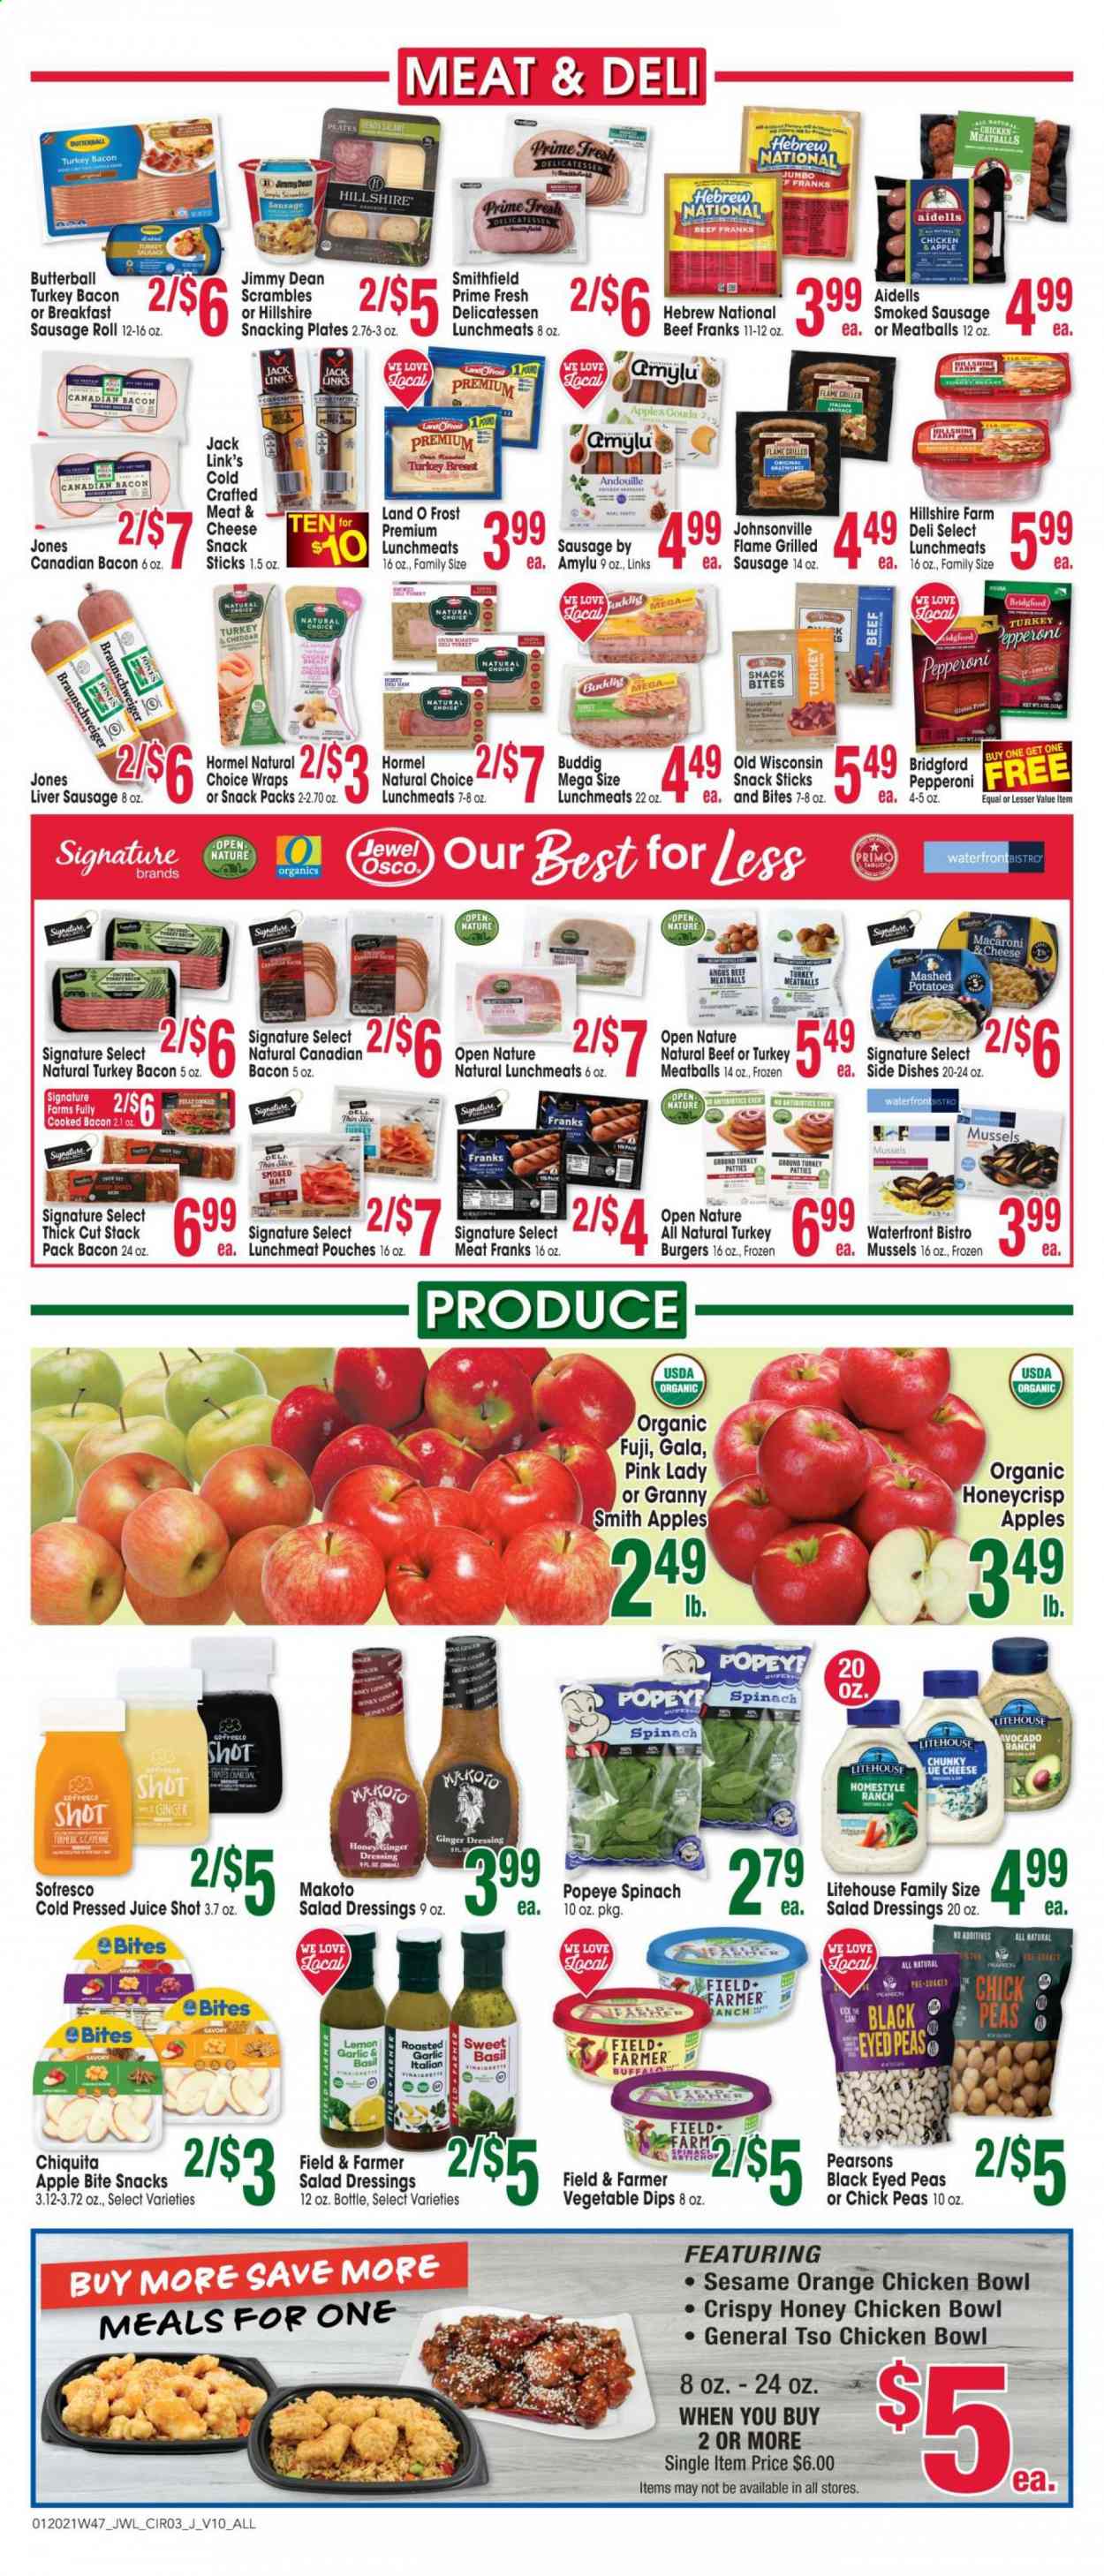 thumbnail - Jewel Osco Flyer - 01/20/2021 - 01/26/2021 - Sales products - sausage rolls, Johnsonville, ginger, apples, oranges, mussels, mashed potatoes, meatballs, hamburger, Jimmy Dean, Hormel, bacon, canadian bacon, turkey bacon, ham, Hillshire Farm, liver sausage, sausage, pepperoni, lunch meat, gouda, spinach, snack, Jack Link's, macaroni, salad dressing, vinaigrette dressing, dressing, juice, gin, Butterball, ground turkey, beef meat. Page 3.